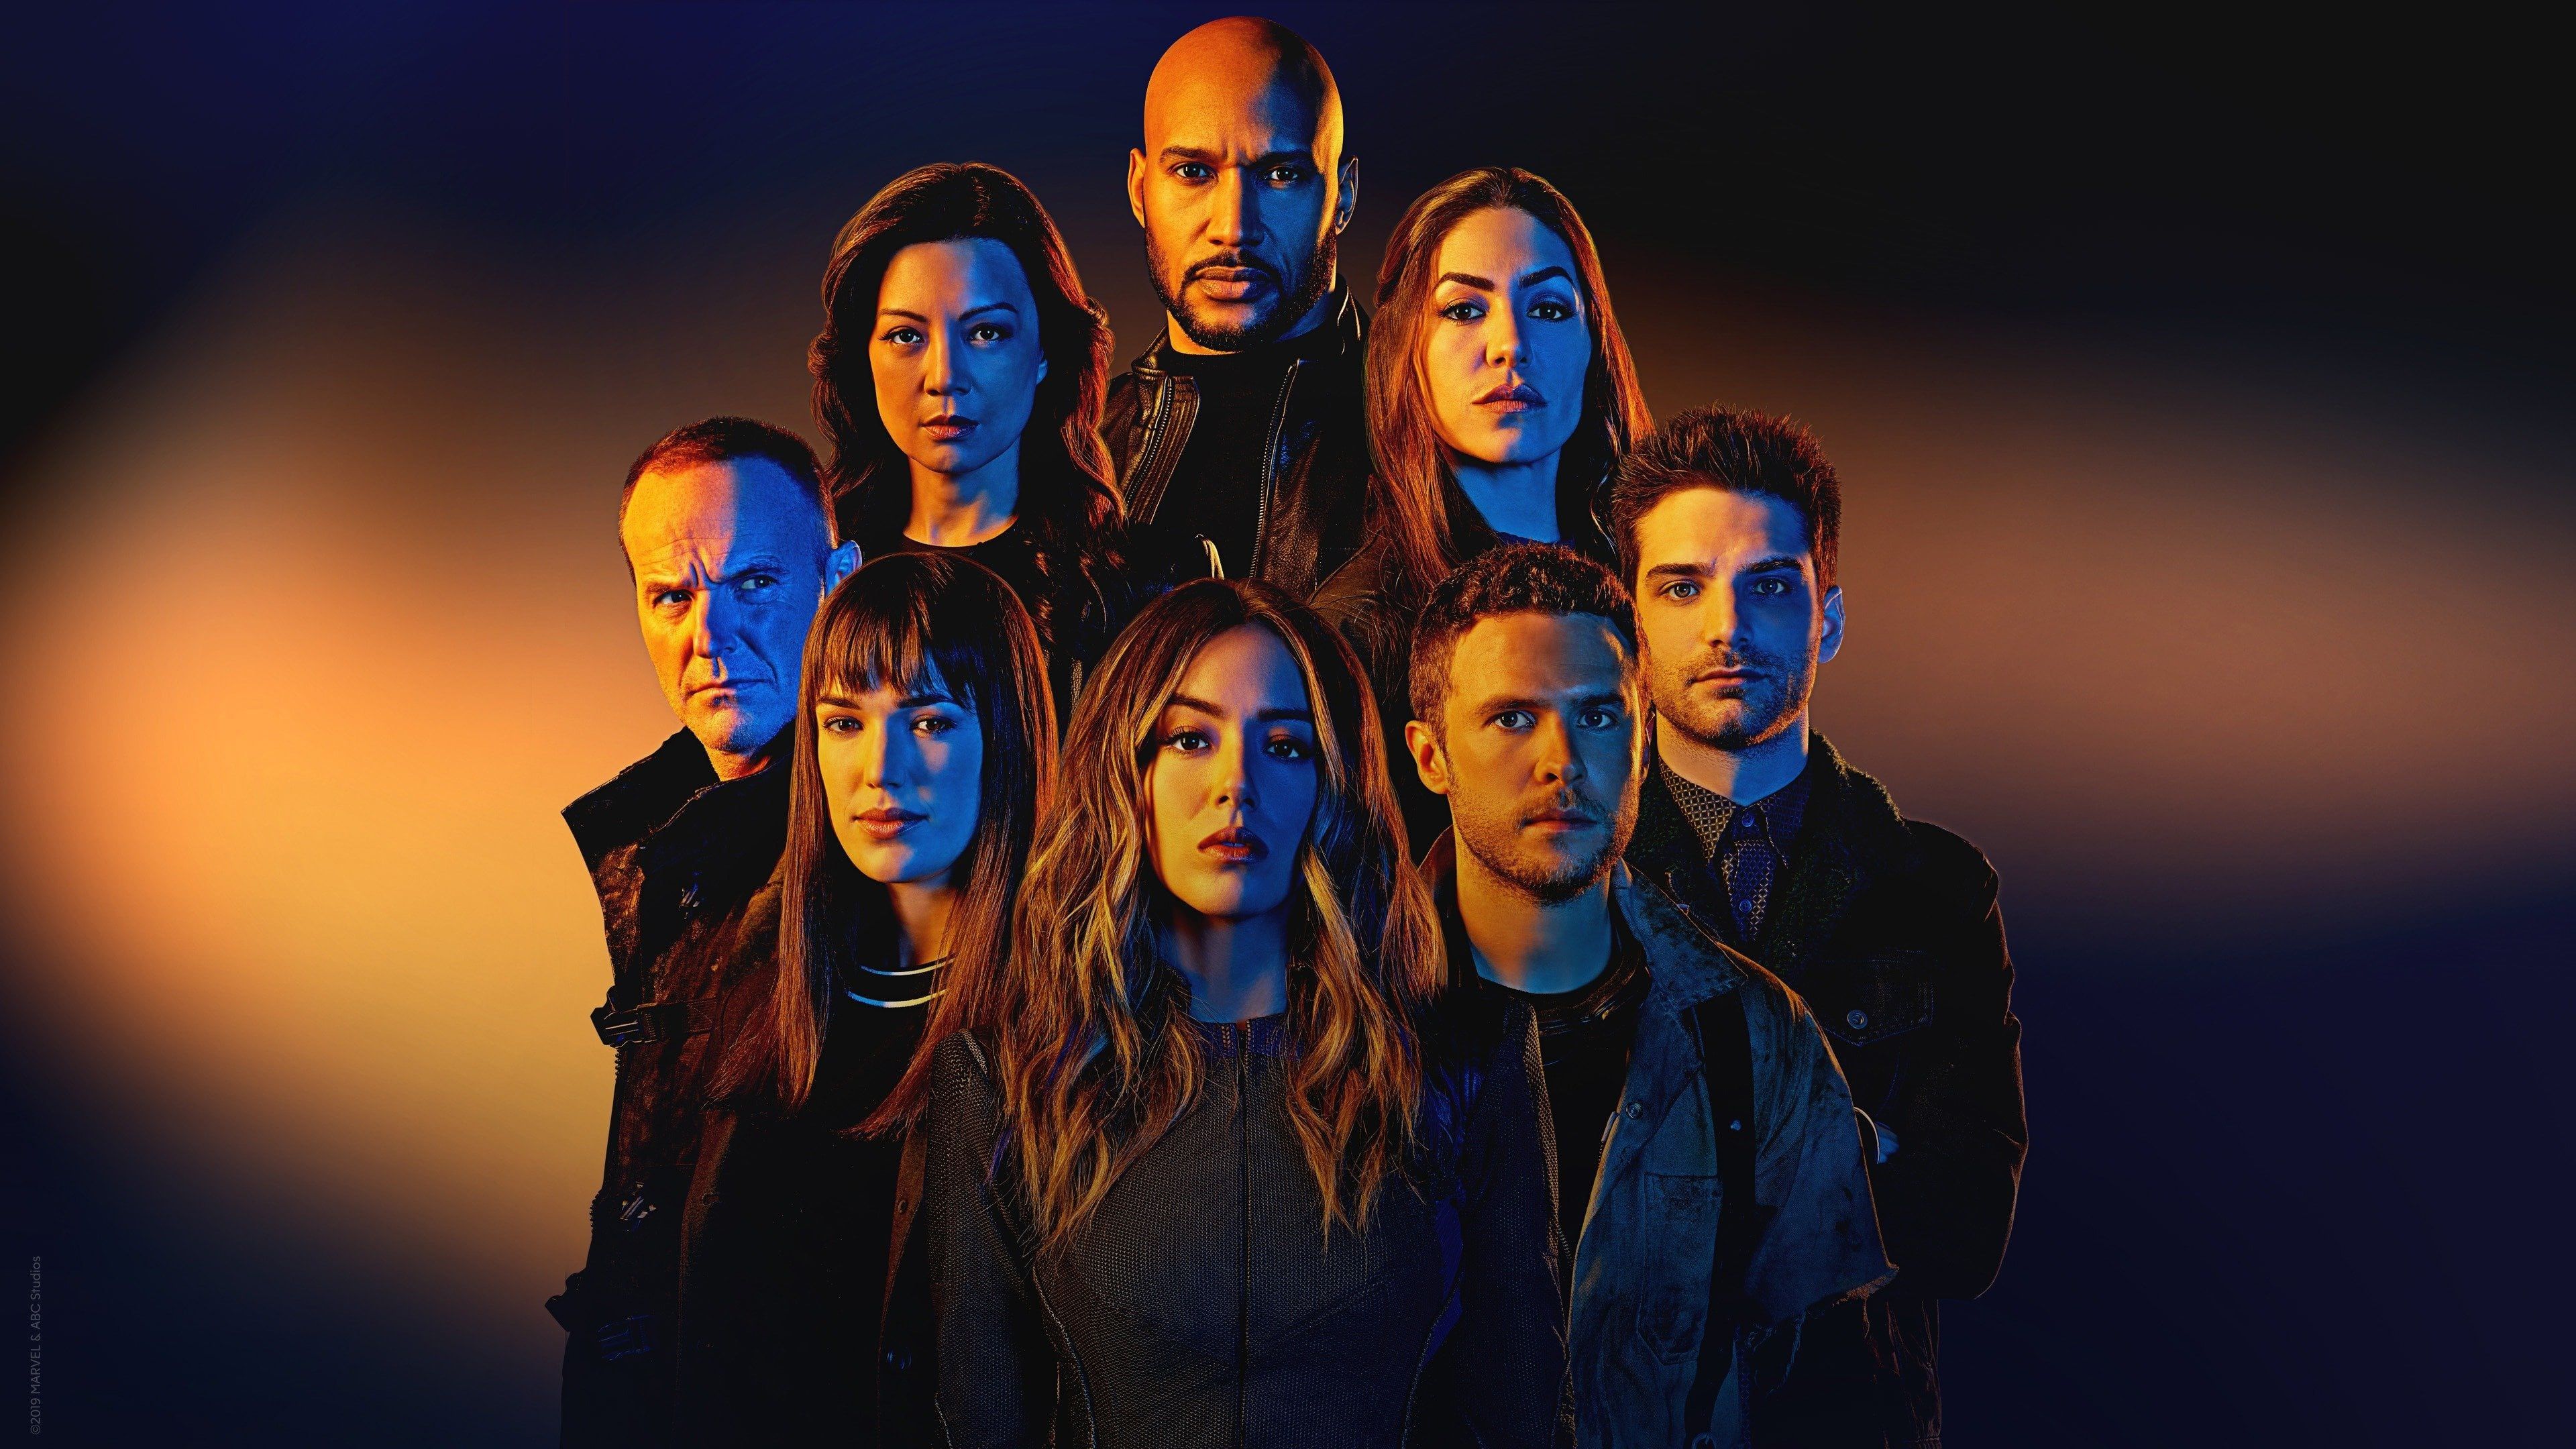 Marvel Agents of SHIELD Wallpaper, HD TV Series 4K Wallpaper, Image, Photo and Background